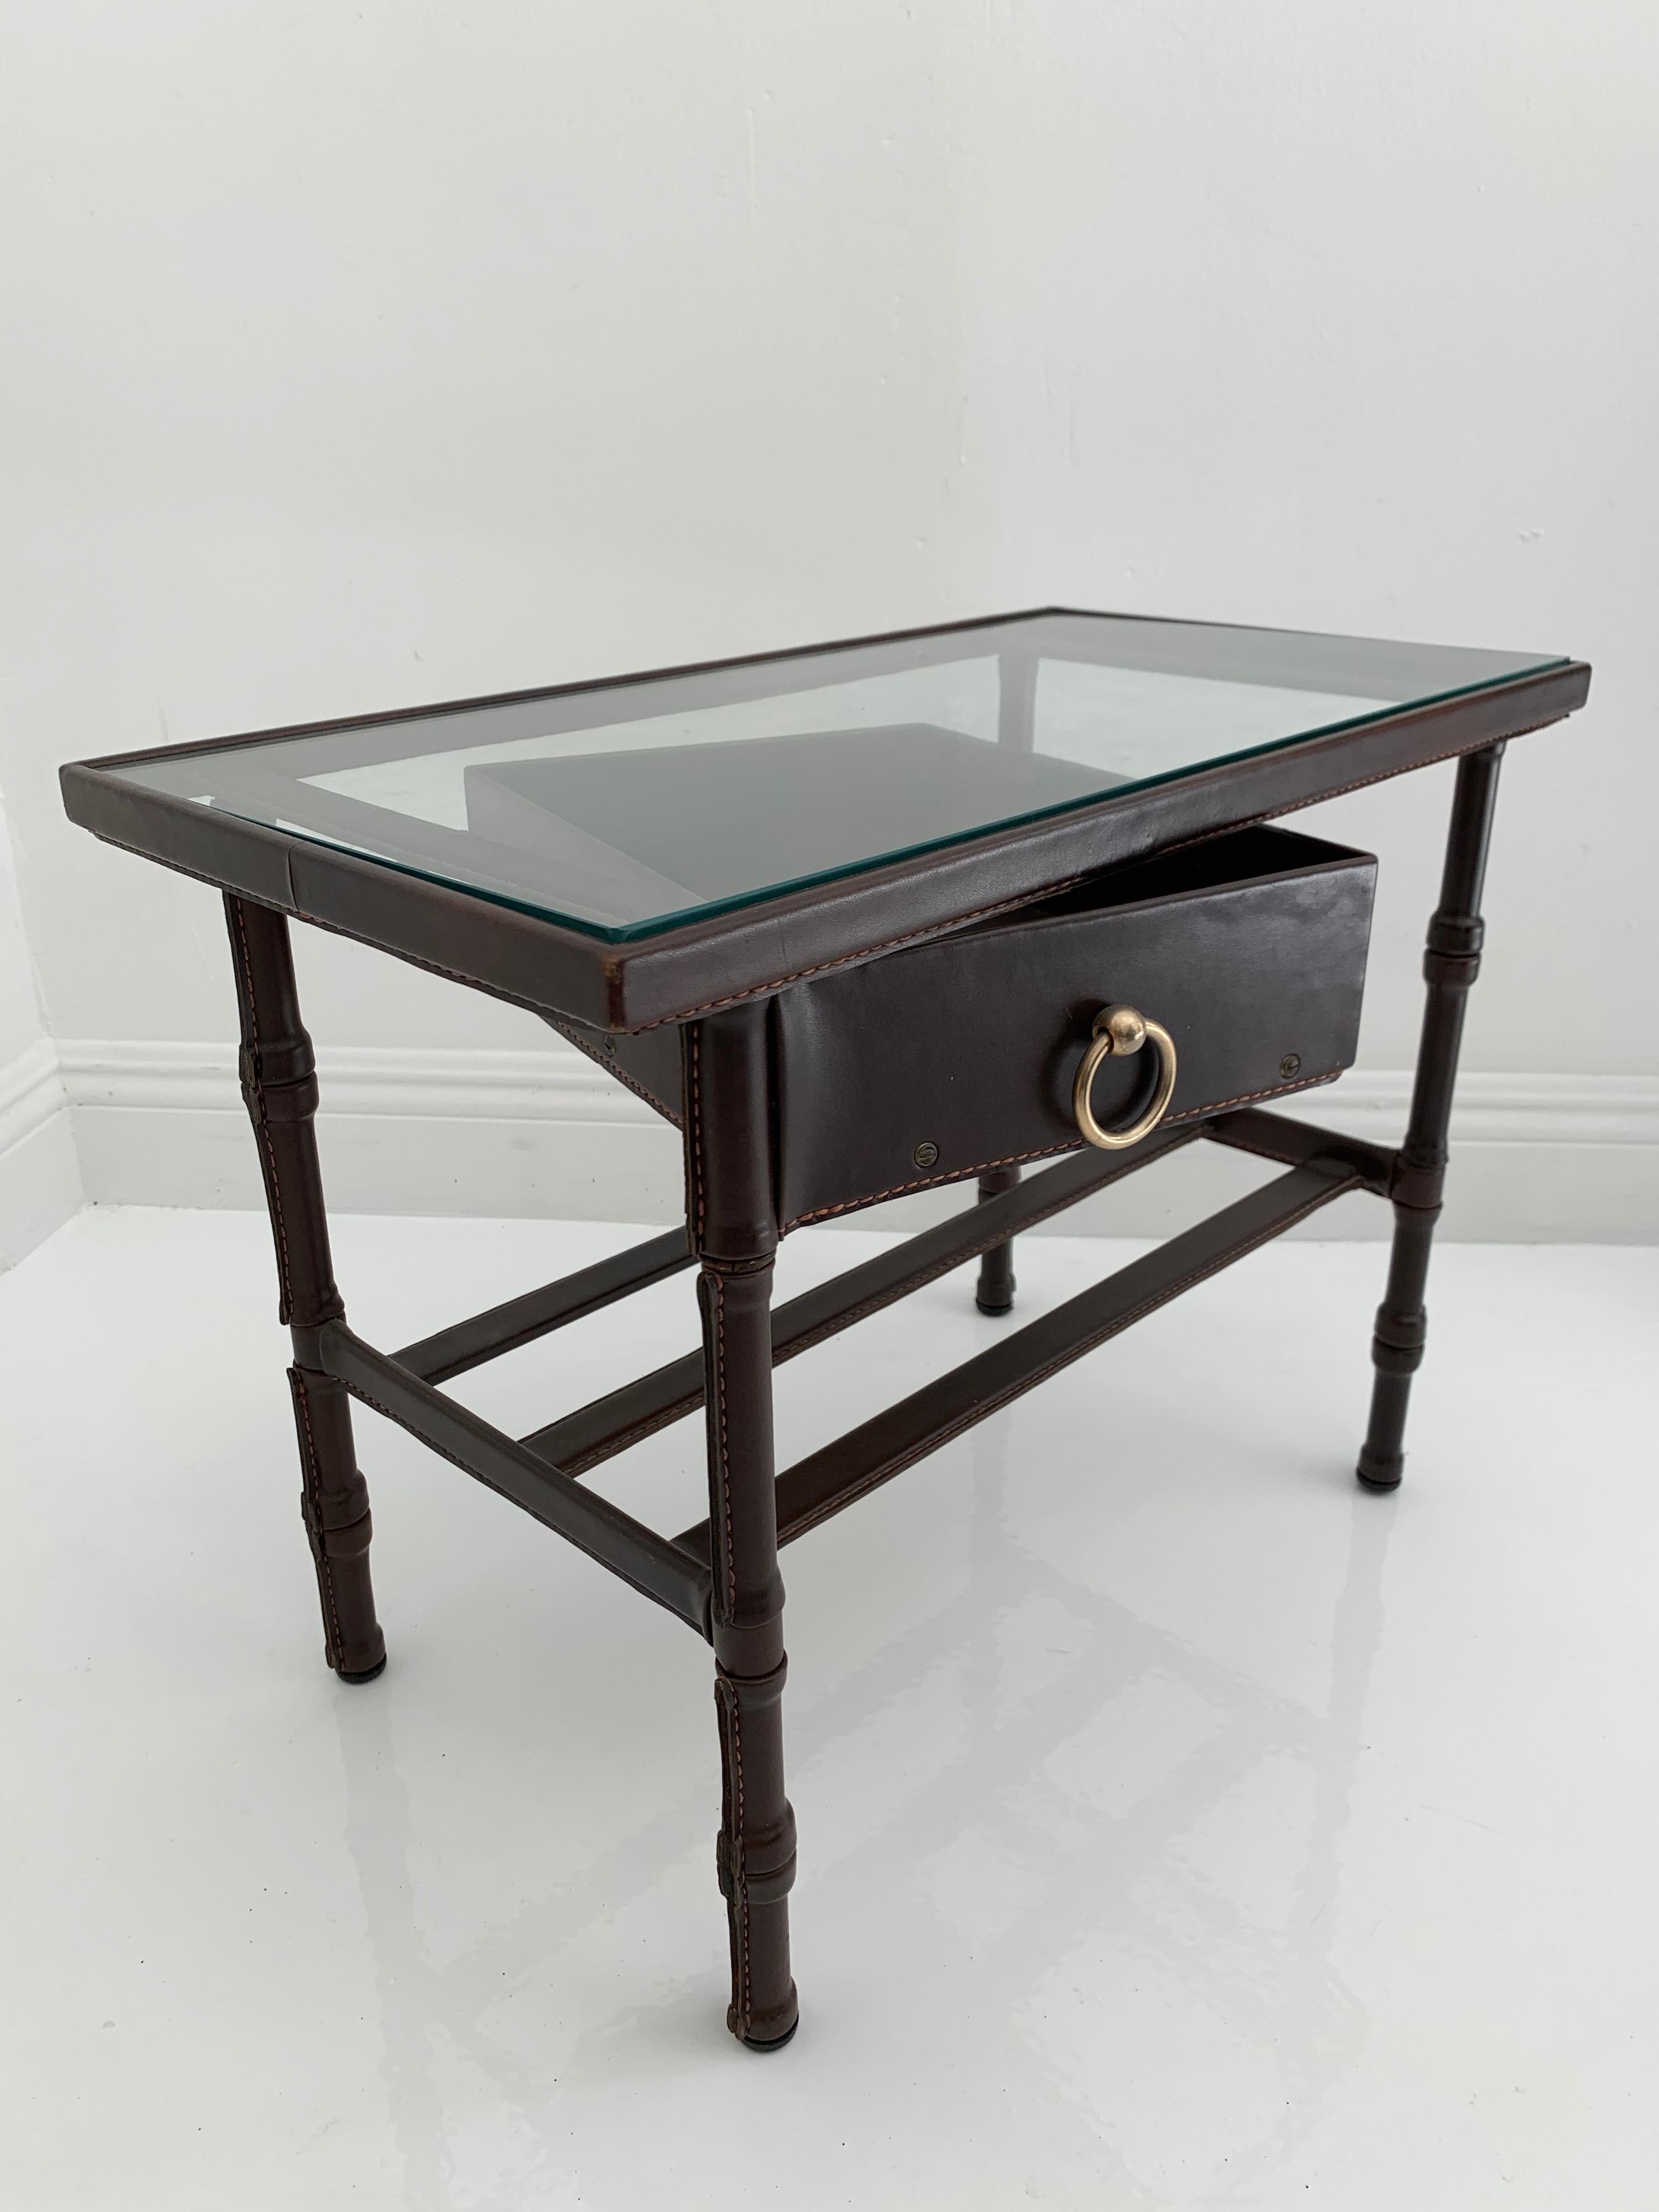 Jacques Adnet leather side table with glass top and swivel drawer. The entire table is wrapped in chocolate brown leather with signature Adnet contrast stitching. Drawer swivels easily 180 degrees away from table and then tucks in perfectly once